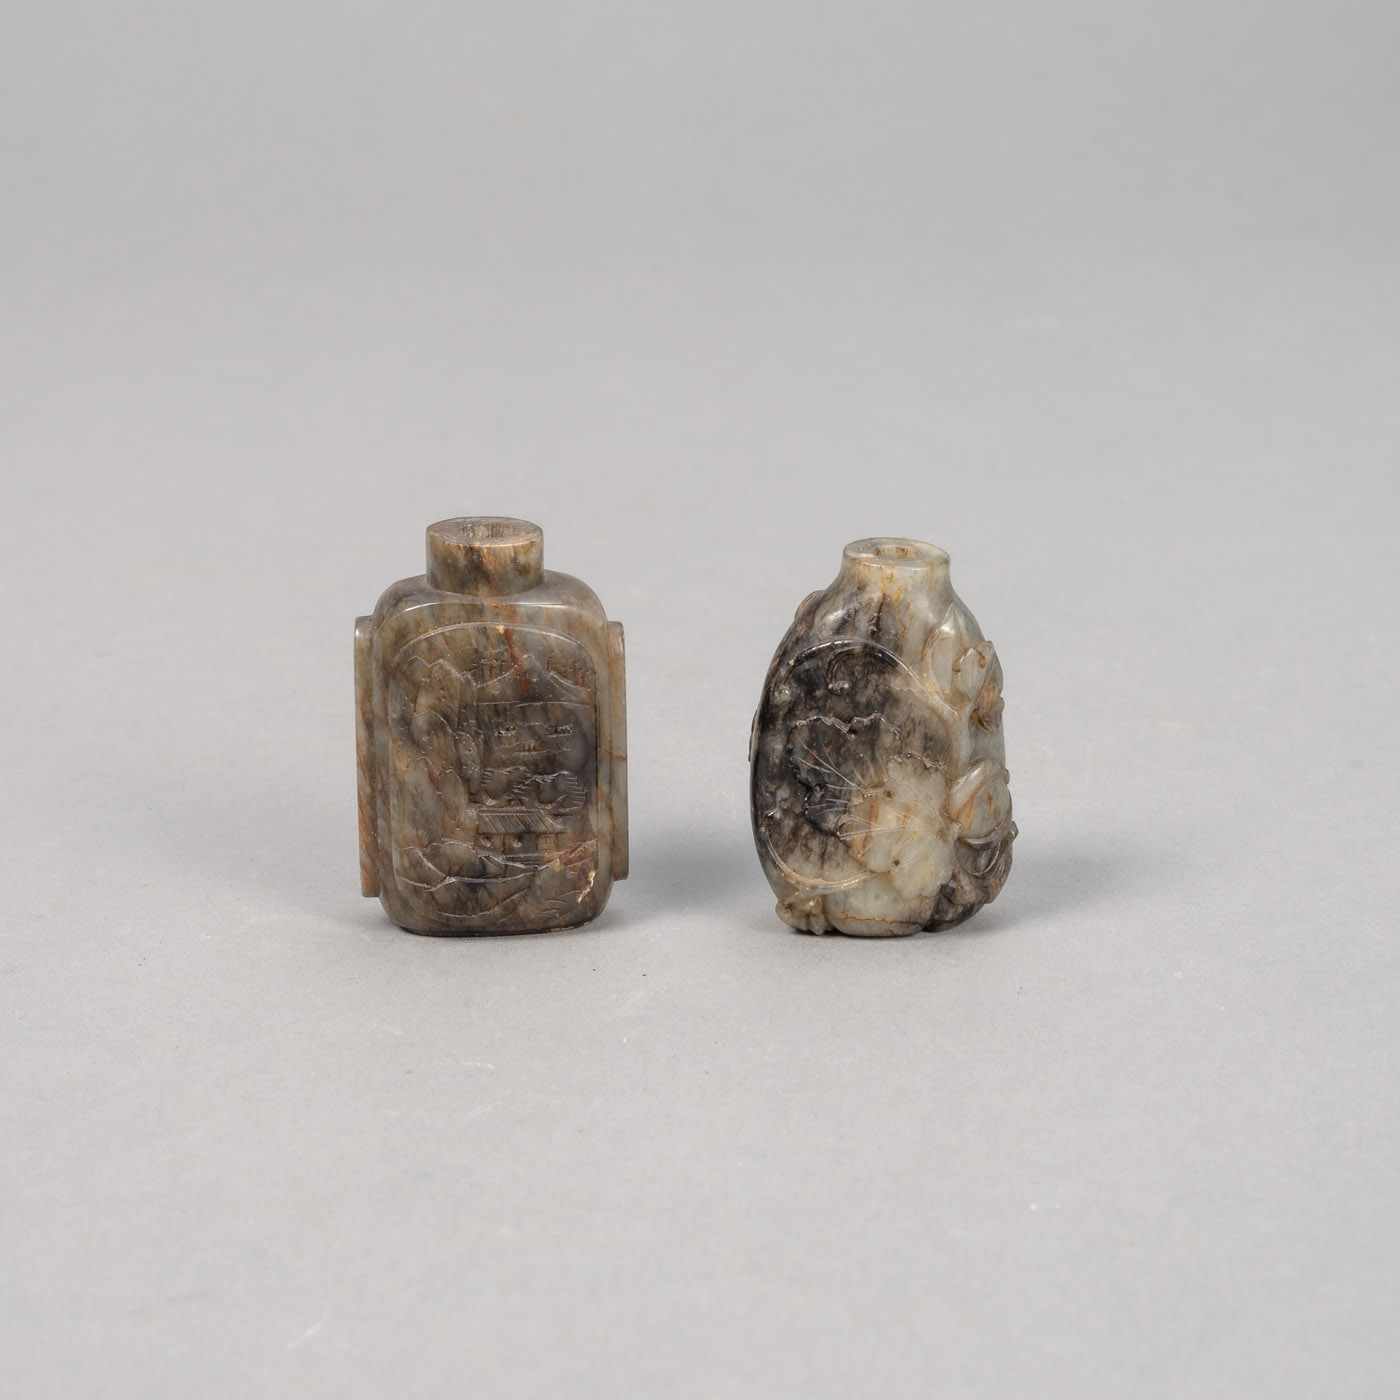 <b>TWO RELIEF CARVED LANDSCAPE AND FLORAL AGATE SNUFFBOTTLES</b>